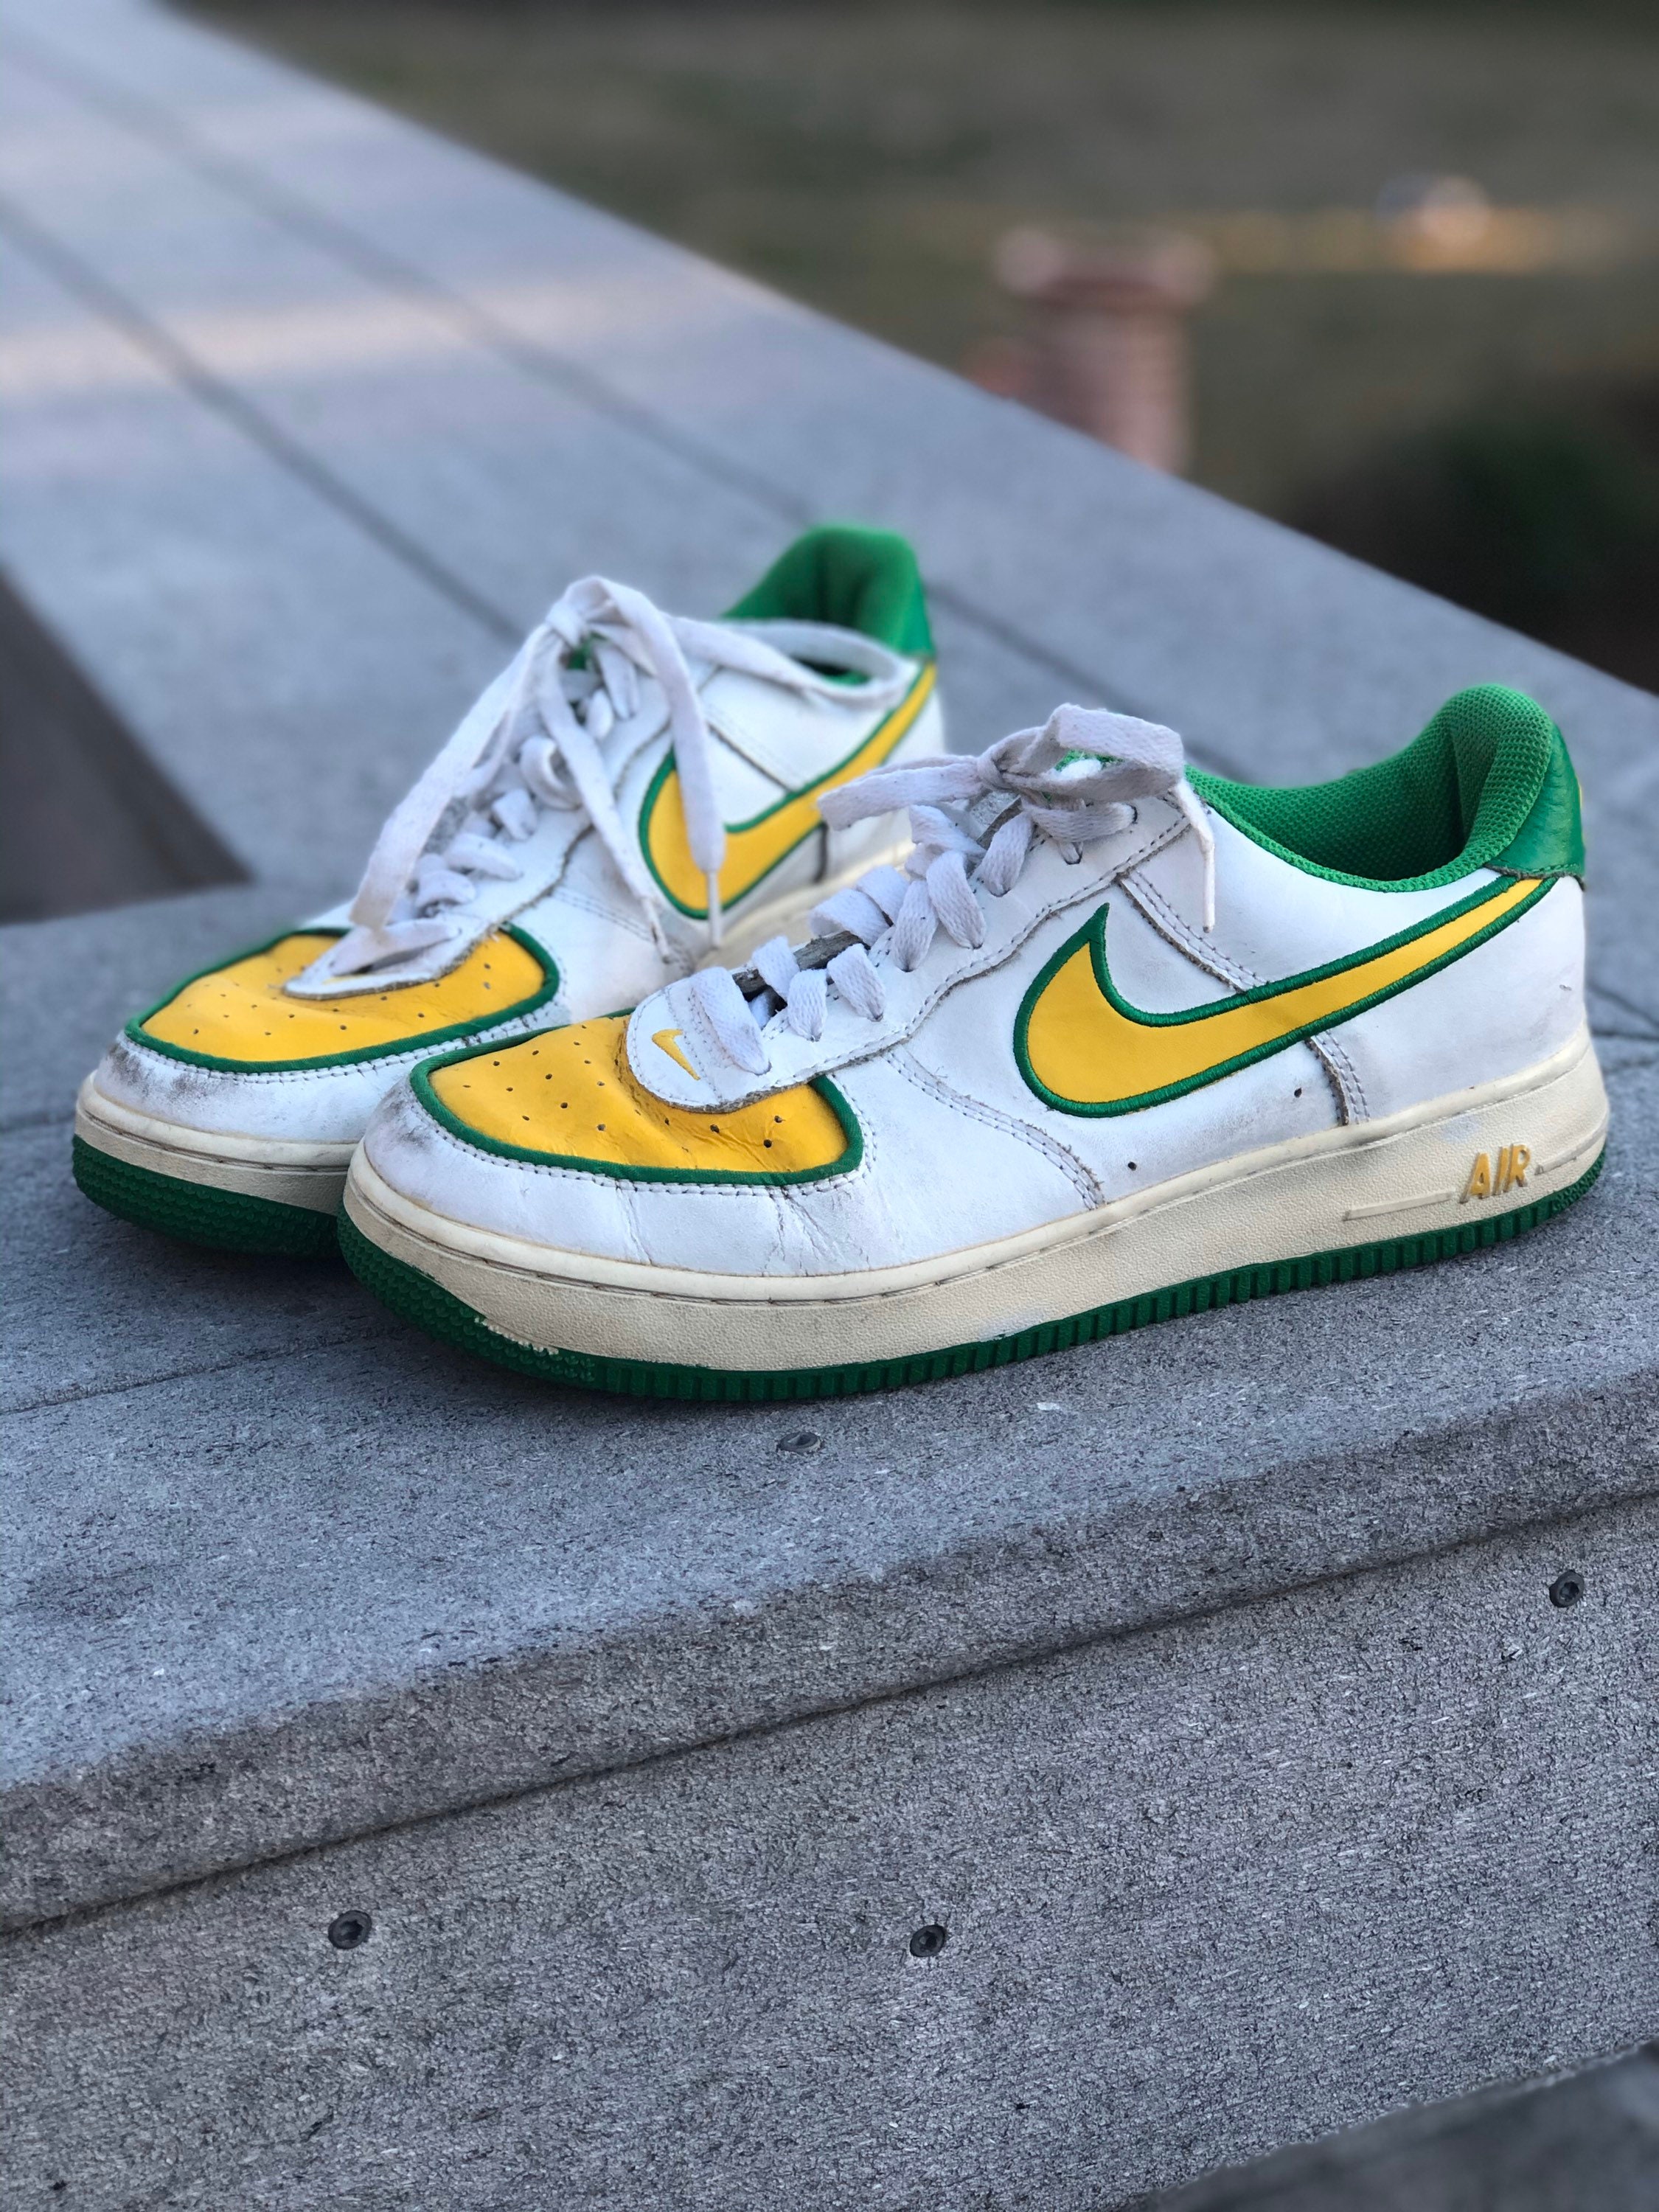 Nike Air Force 1 Size 7.5 Vintage Green and Yellow Baylor 